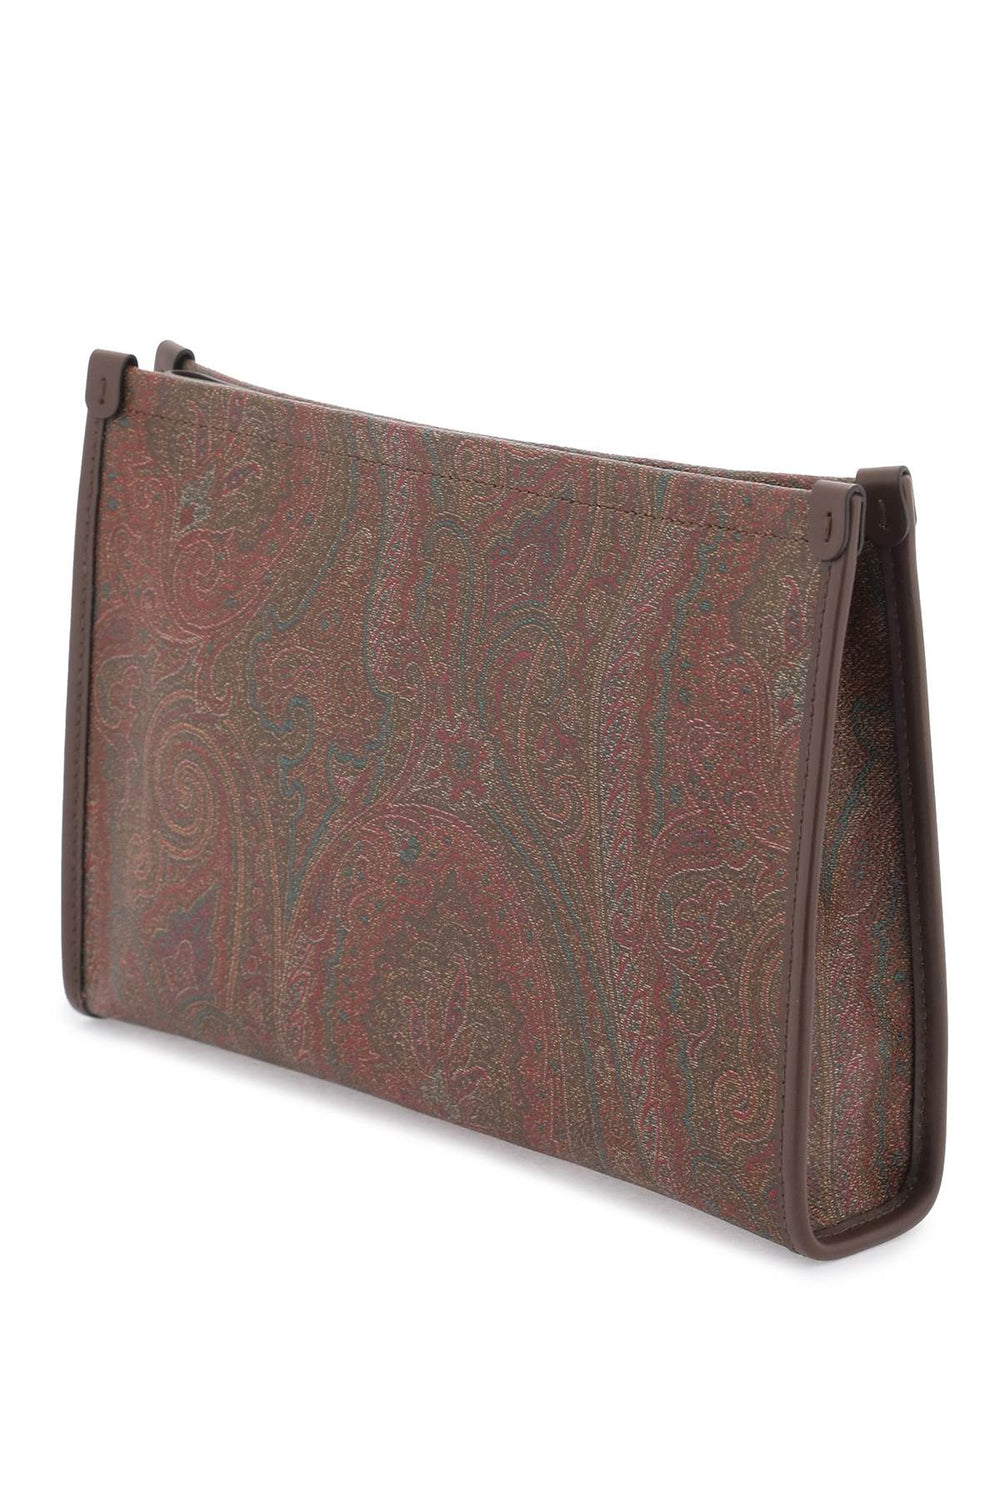 paisley pouch with embroidery-1